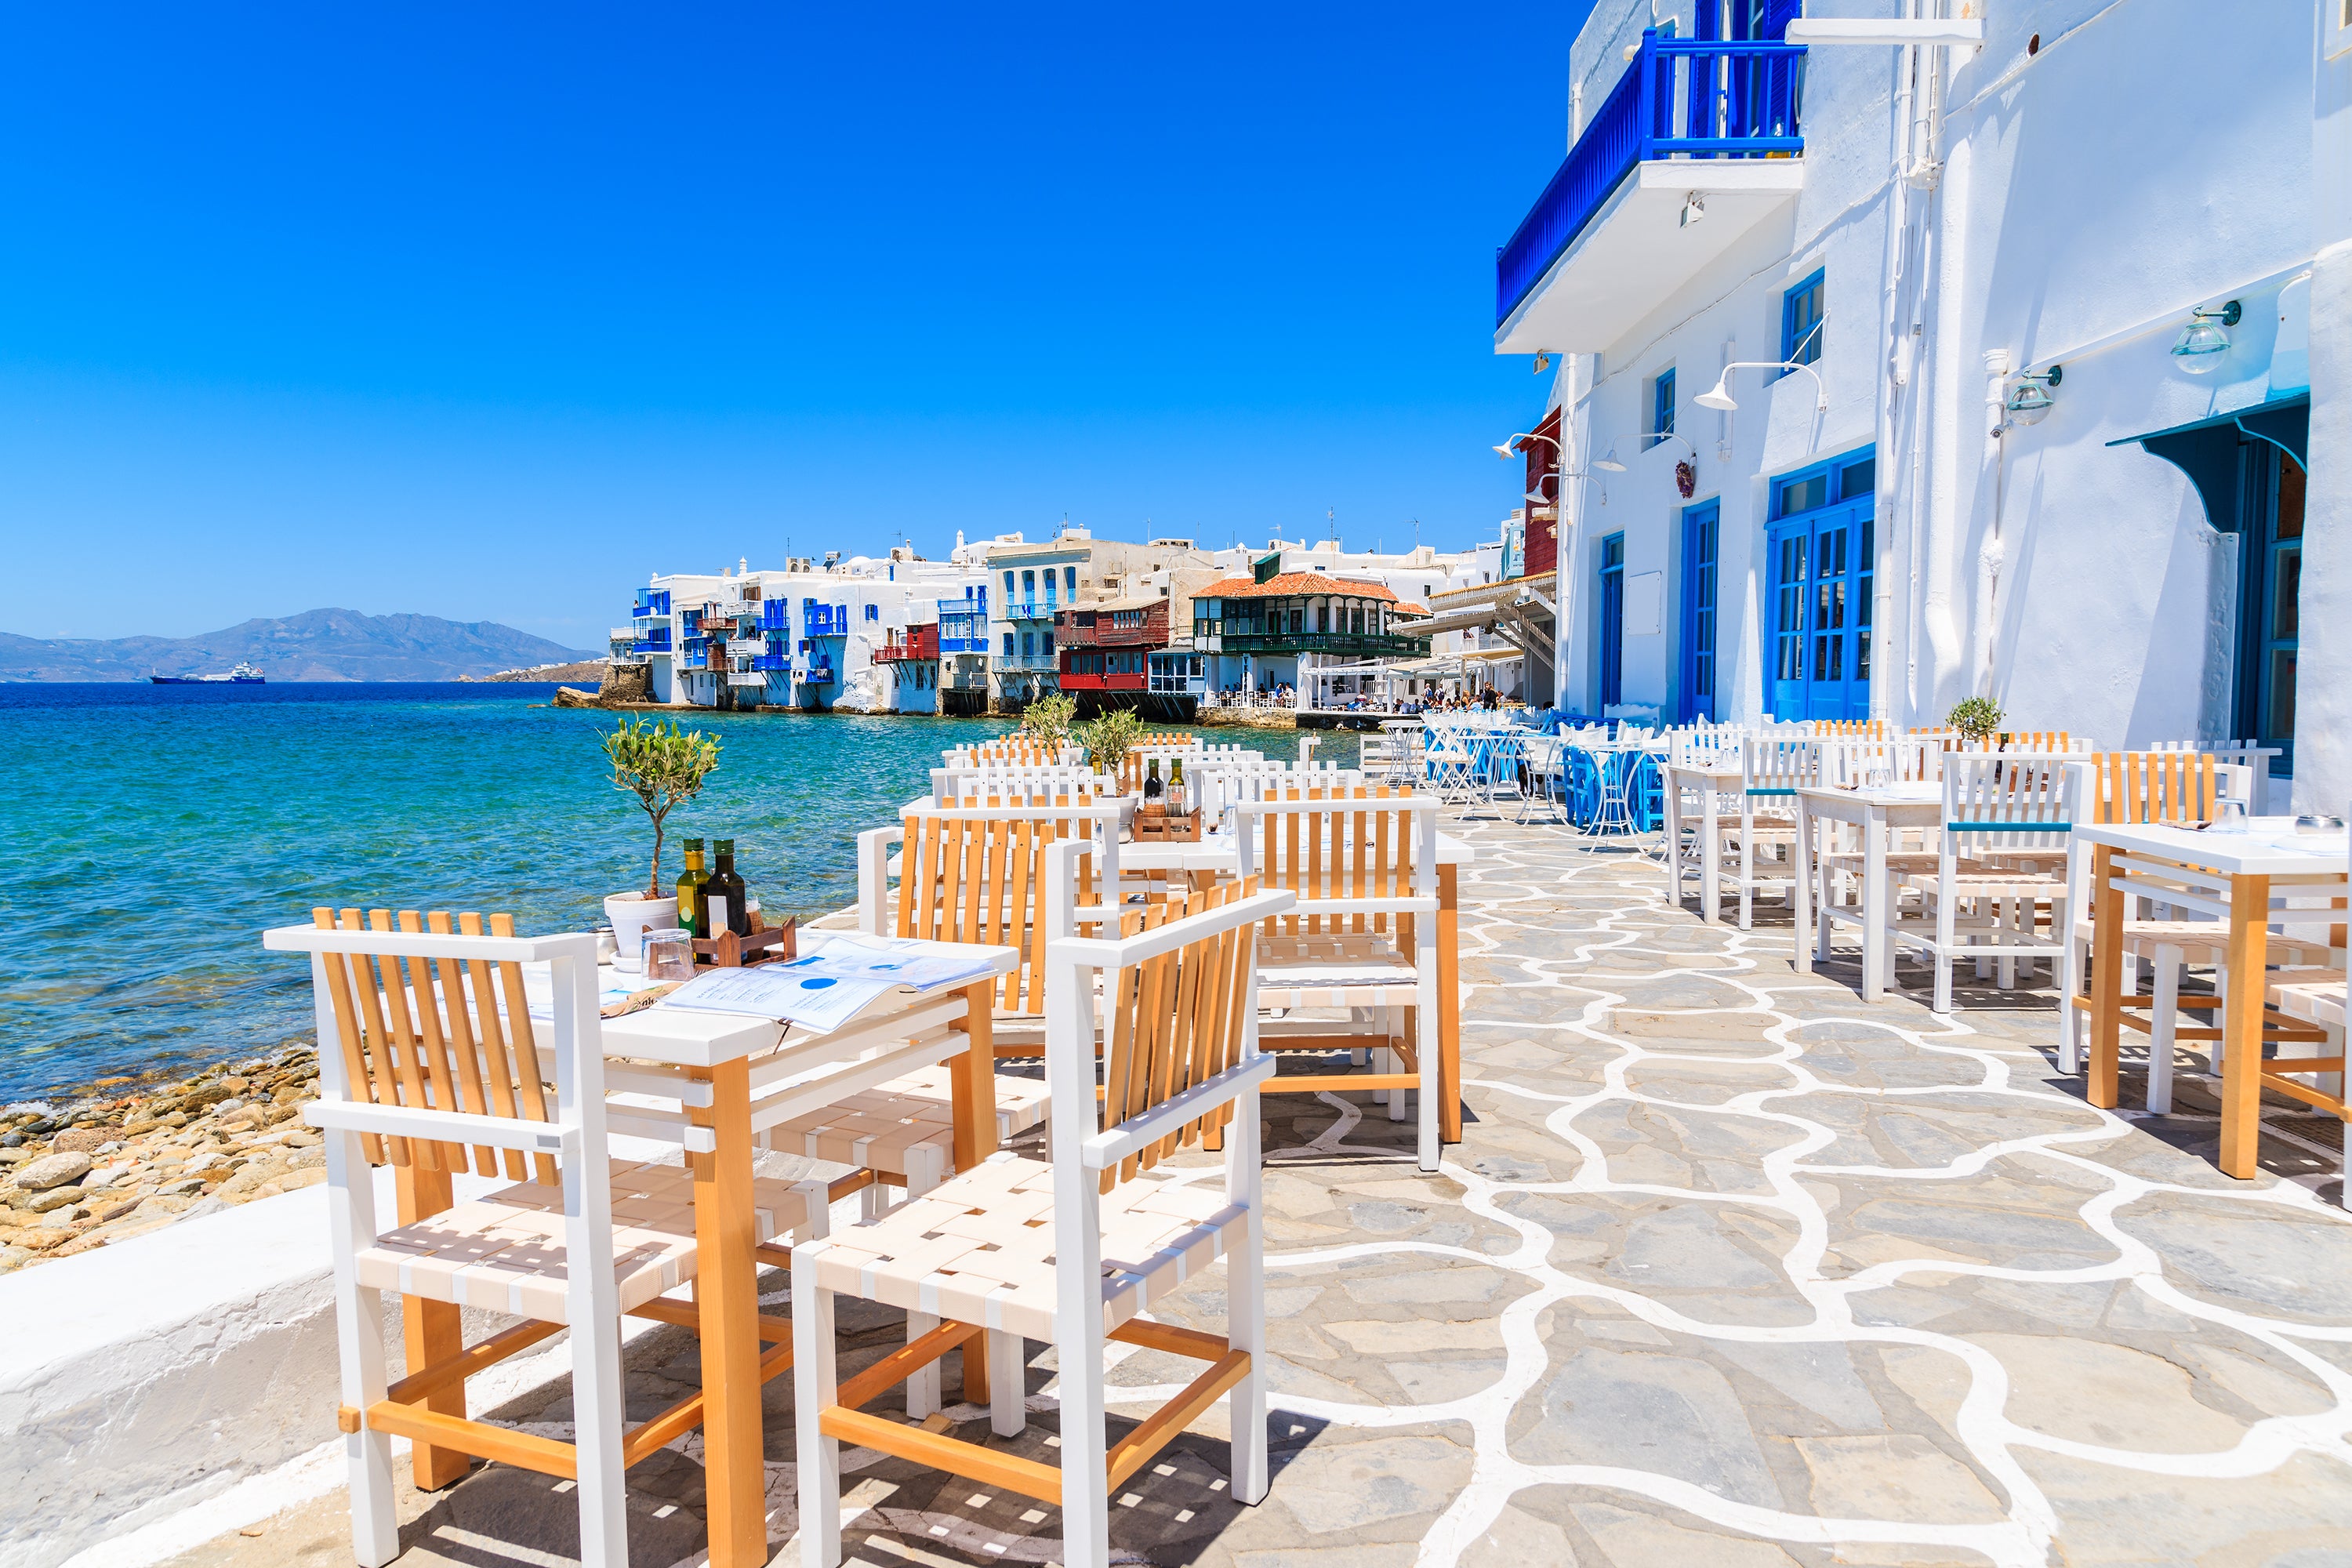 Get ready to enjoy remarkable scenes like this colourful Mykonos coastline on your perfect cruise